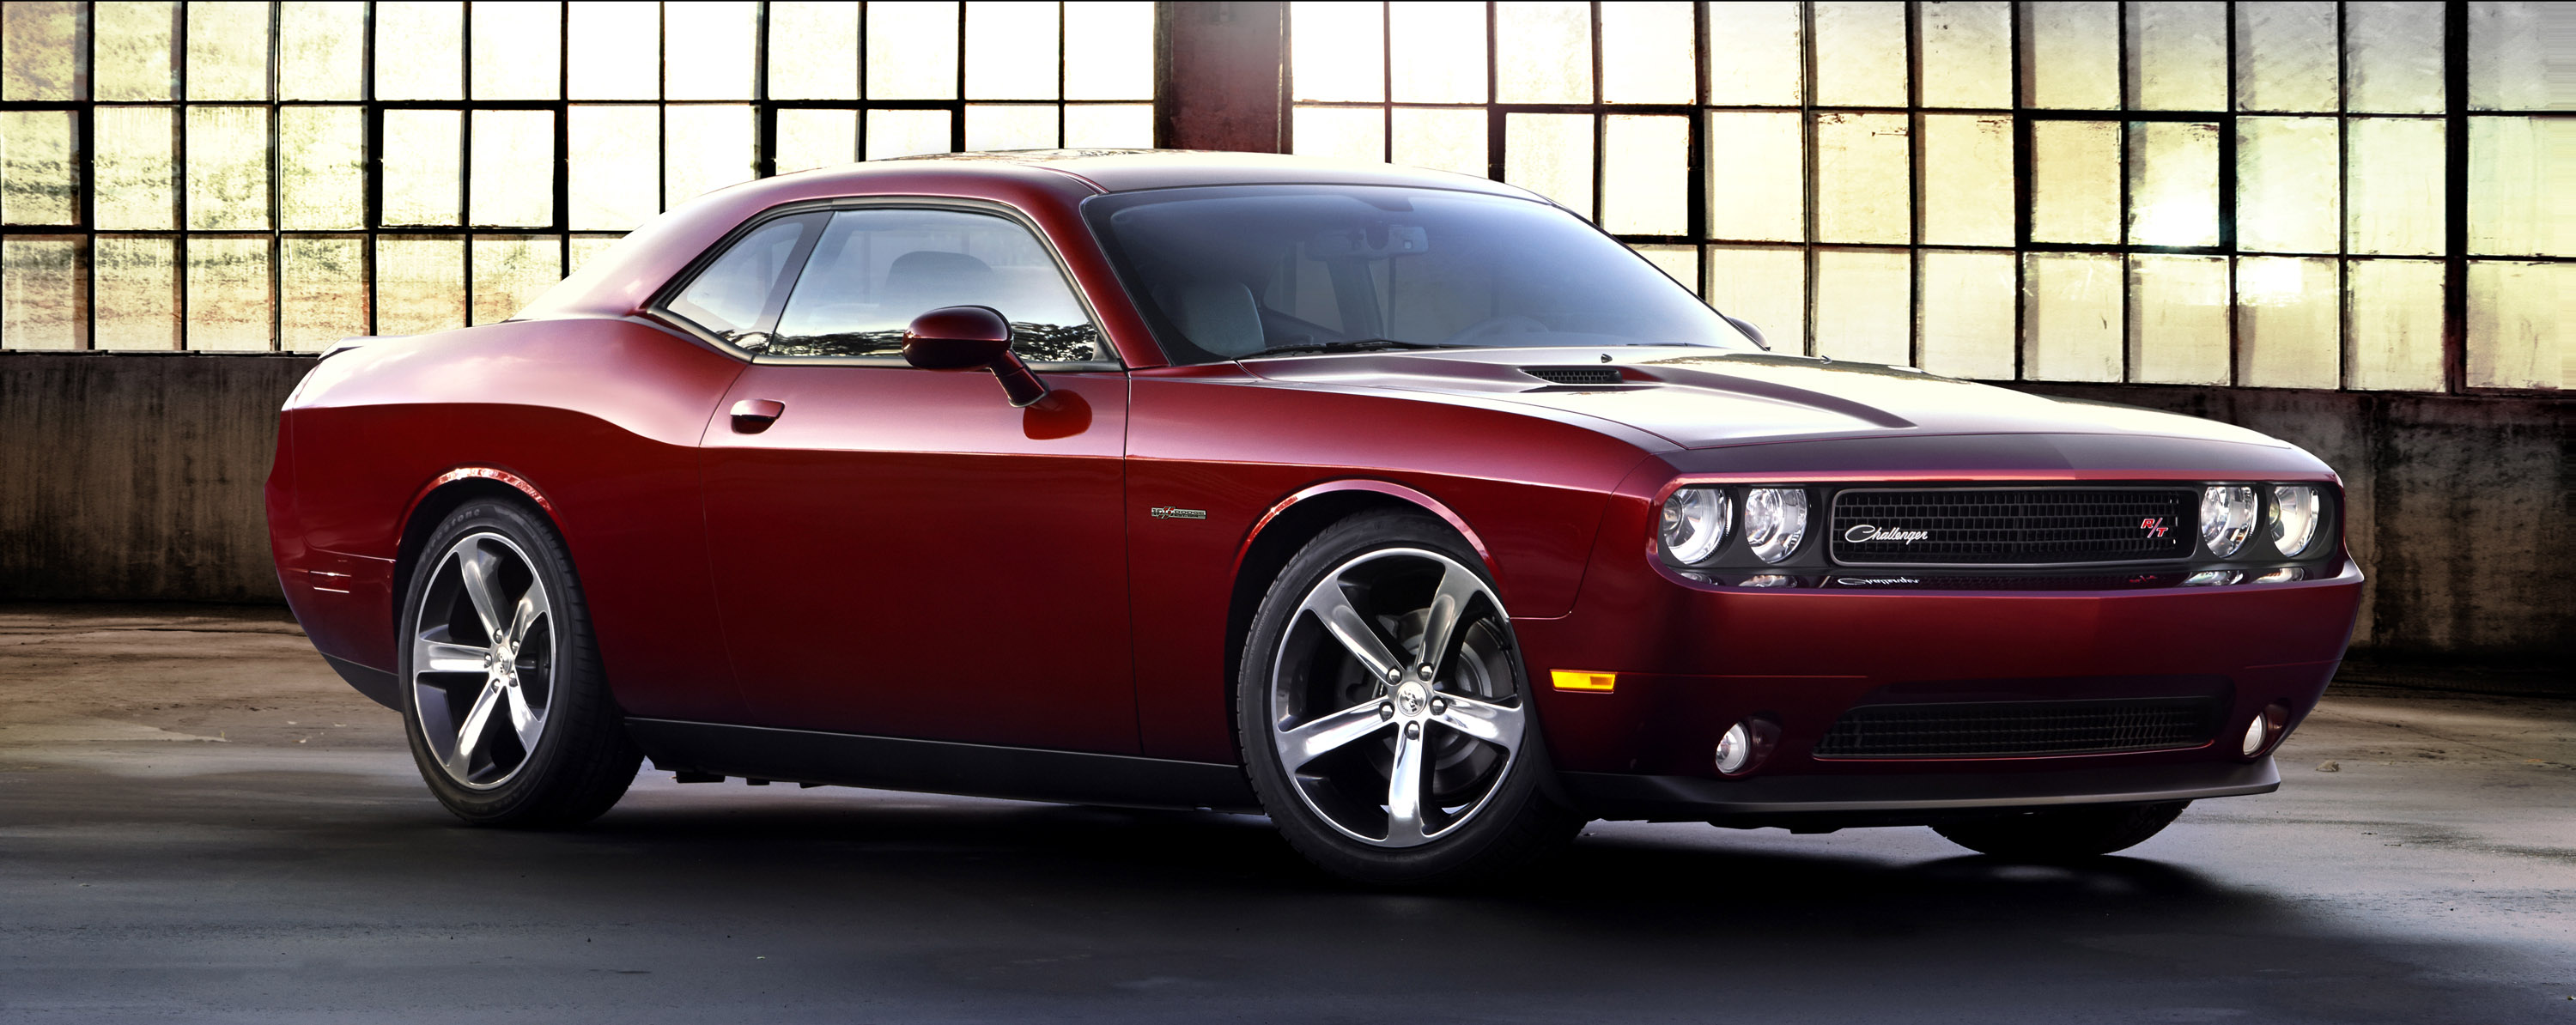 2014 Dodge Challenger 100th Anniversary Edition - HD Pictures @ carsinvasion.com